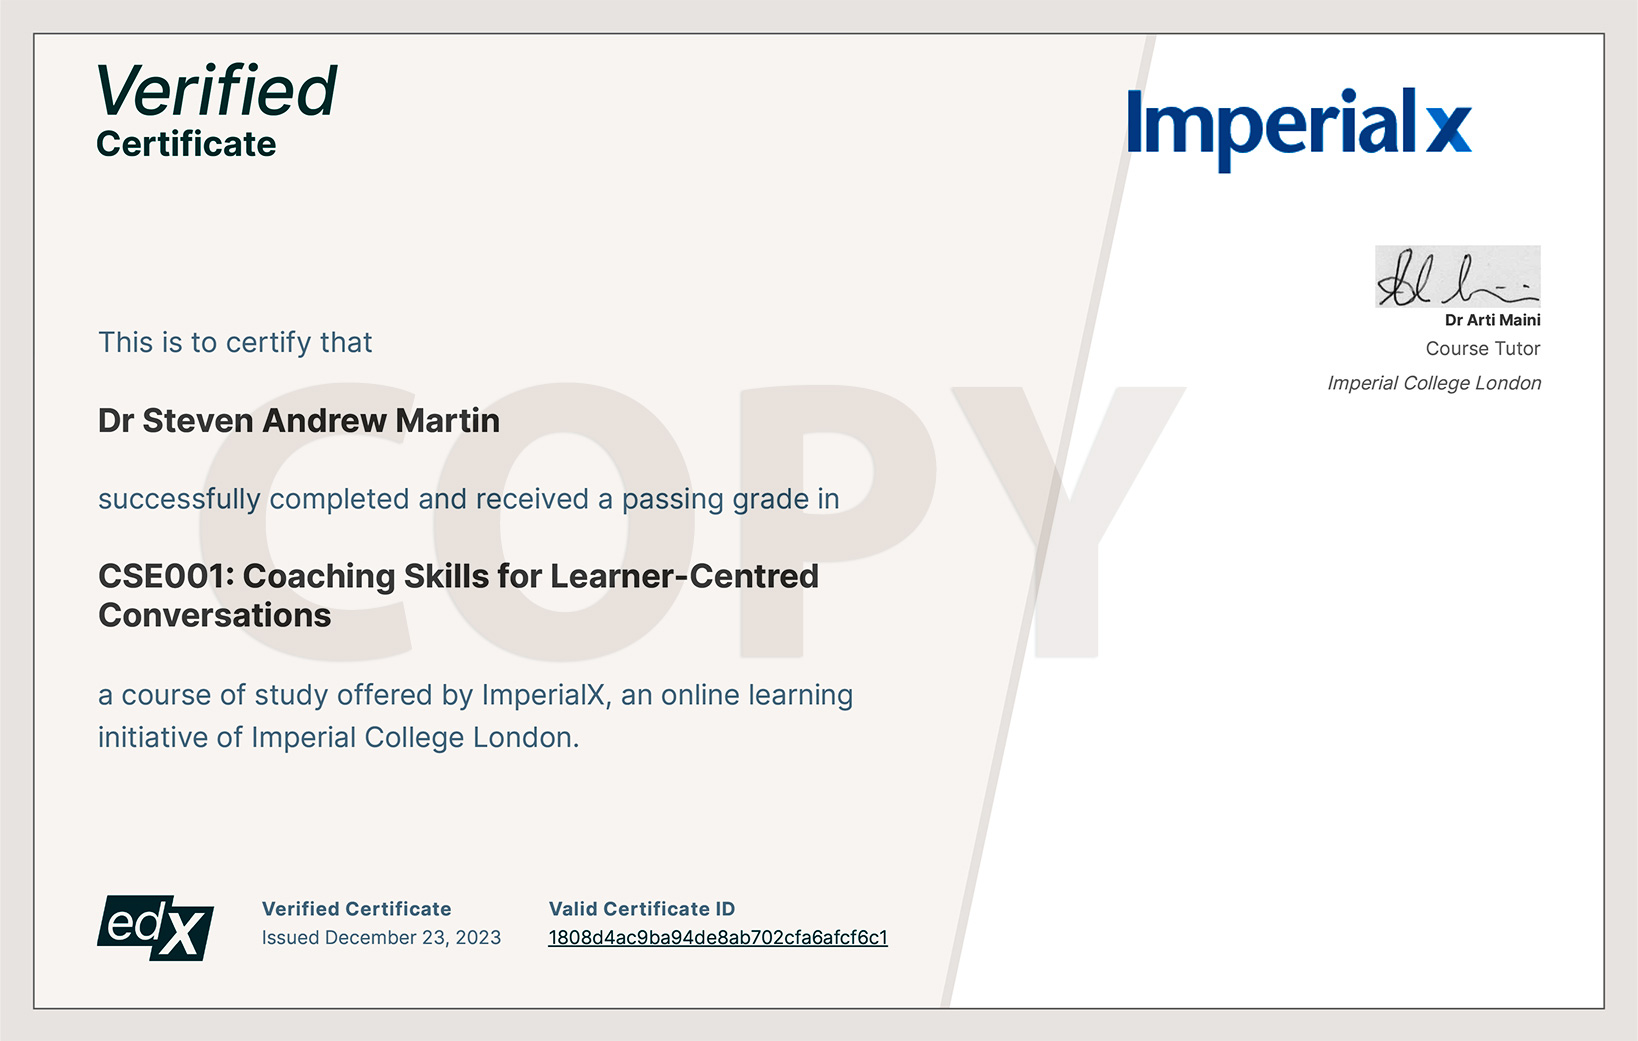 Life coaching through conversational English | A learner-centered approach | Surf Doctor Steven Andrew Martin | English language tutor and life coach | London Imperial College